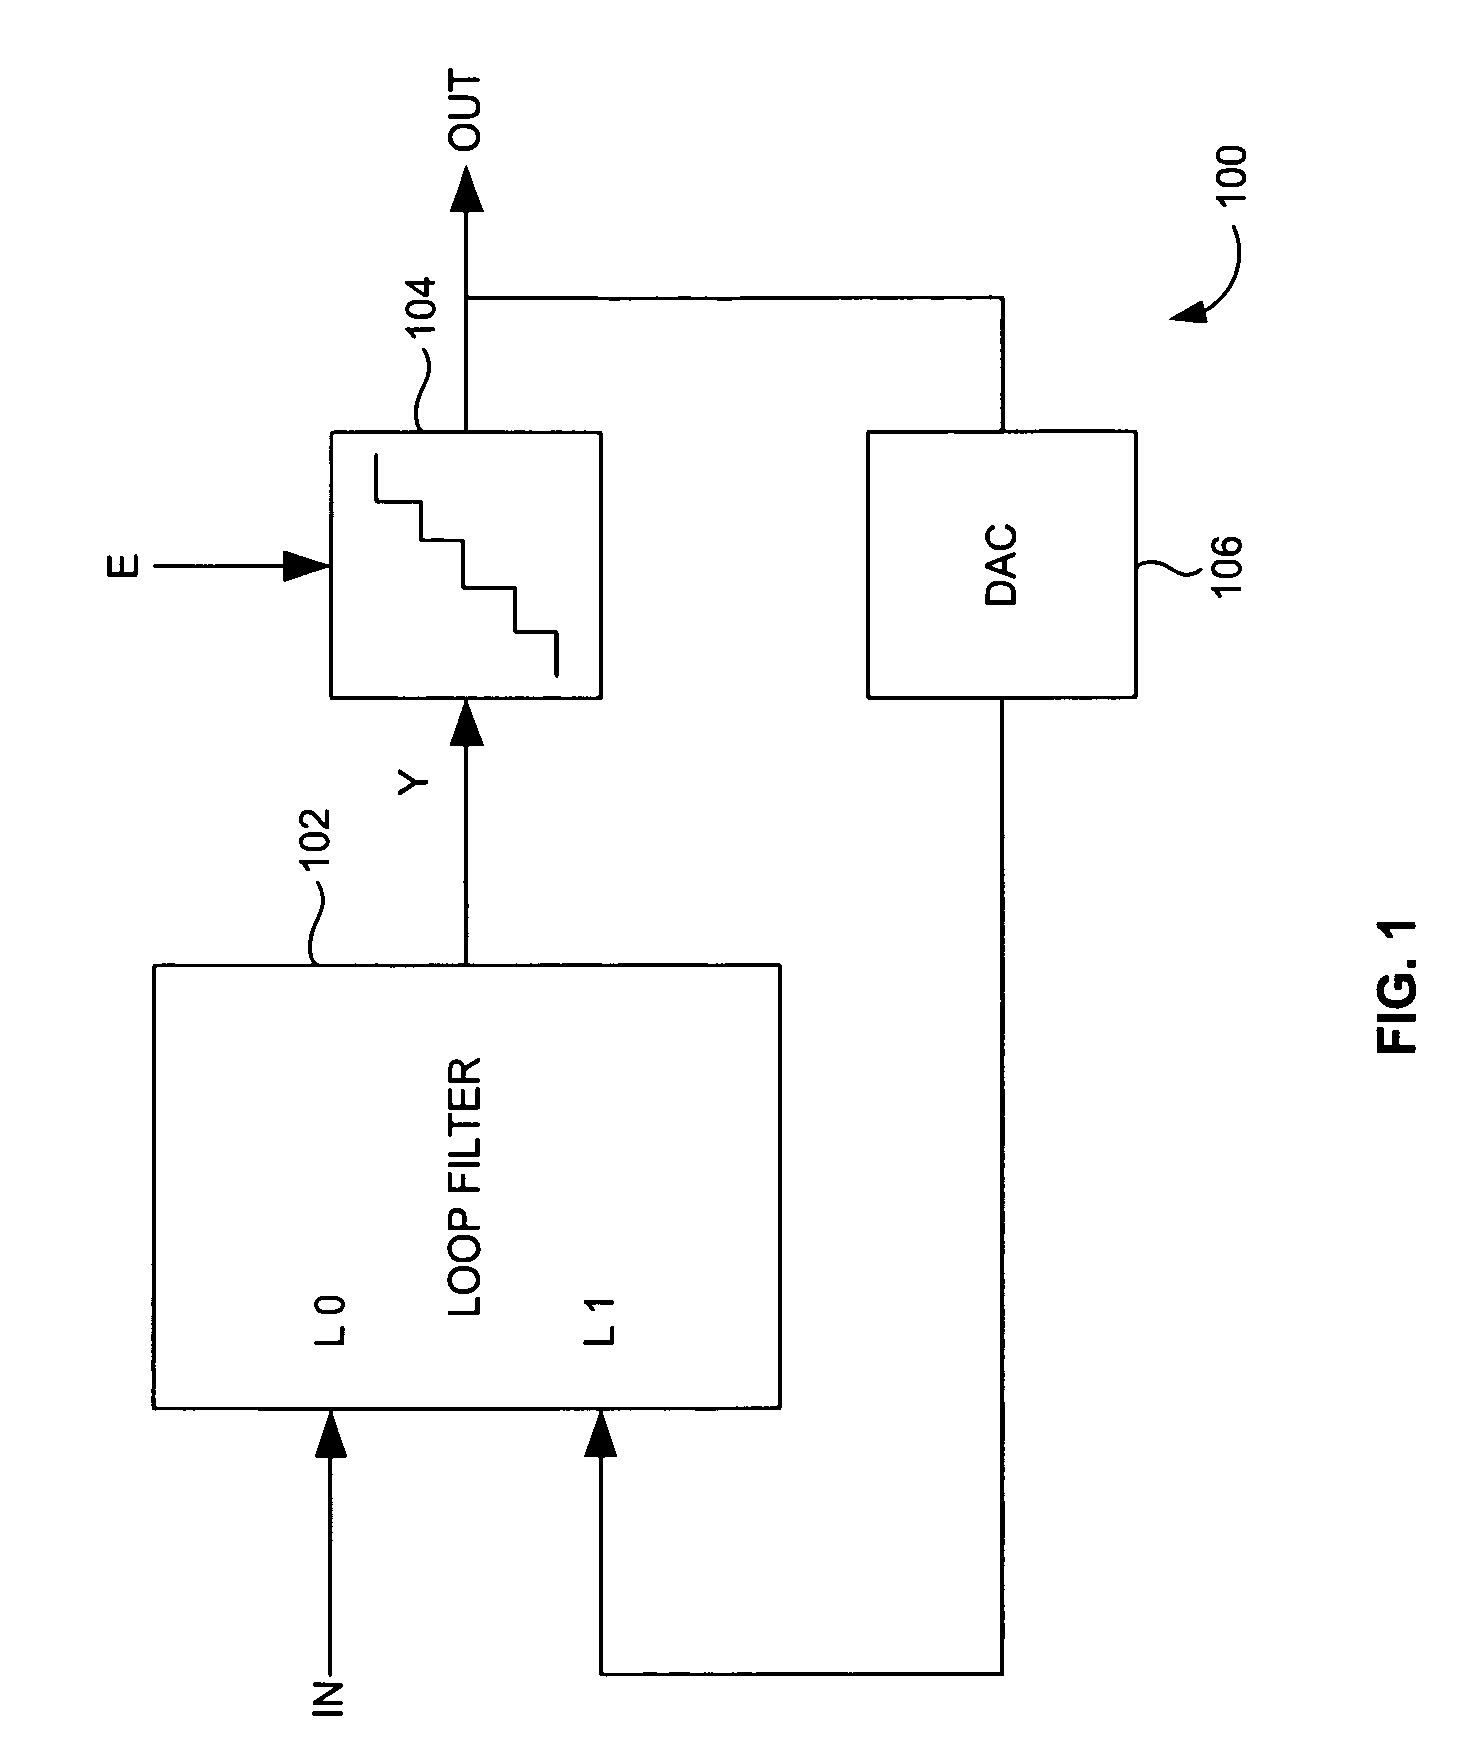 Continuous time sigma-delta analog-to-digital converter with stability